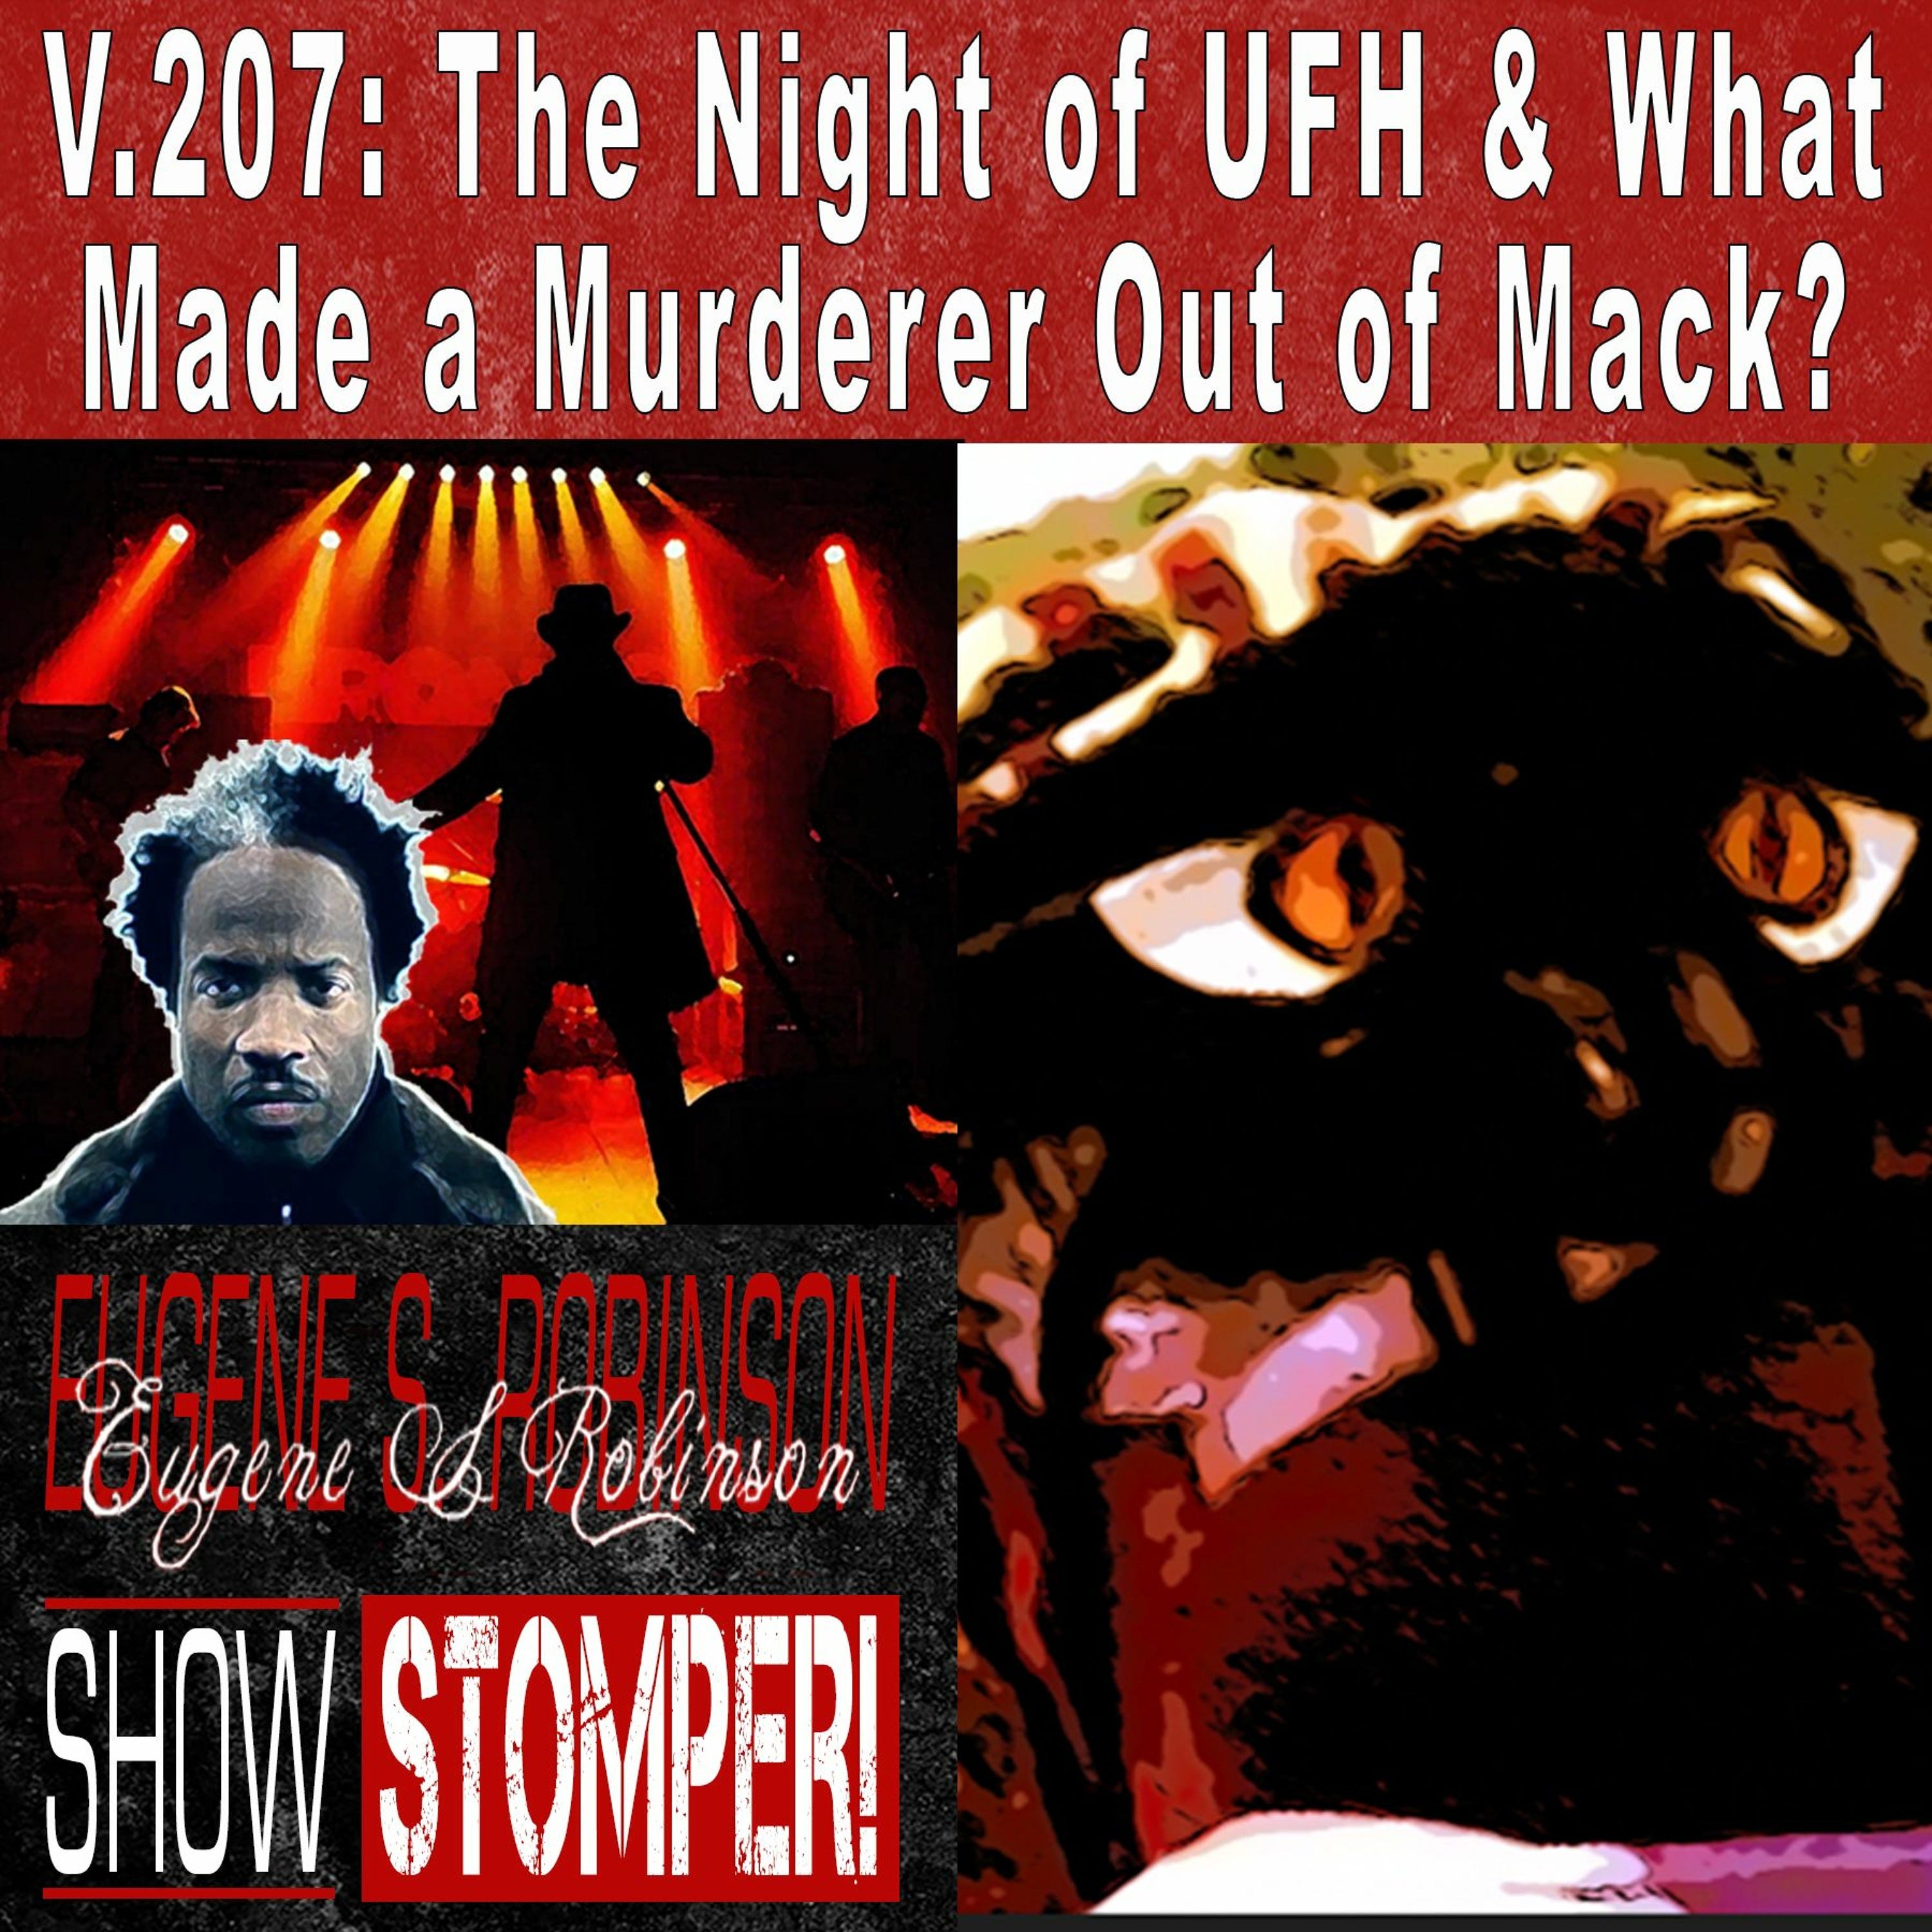 V.207: The Night of UGH + What Made a Murderer Out of Mack? On The Eugene S. Robinson Show Stomper!